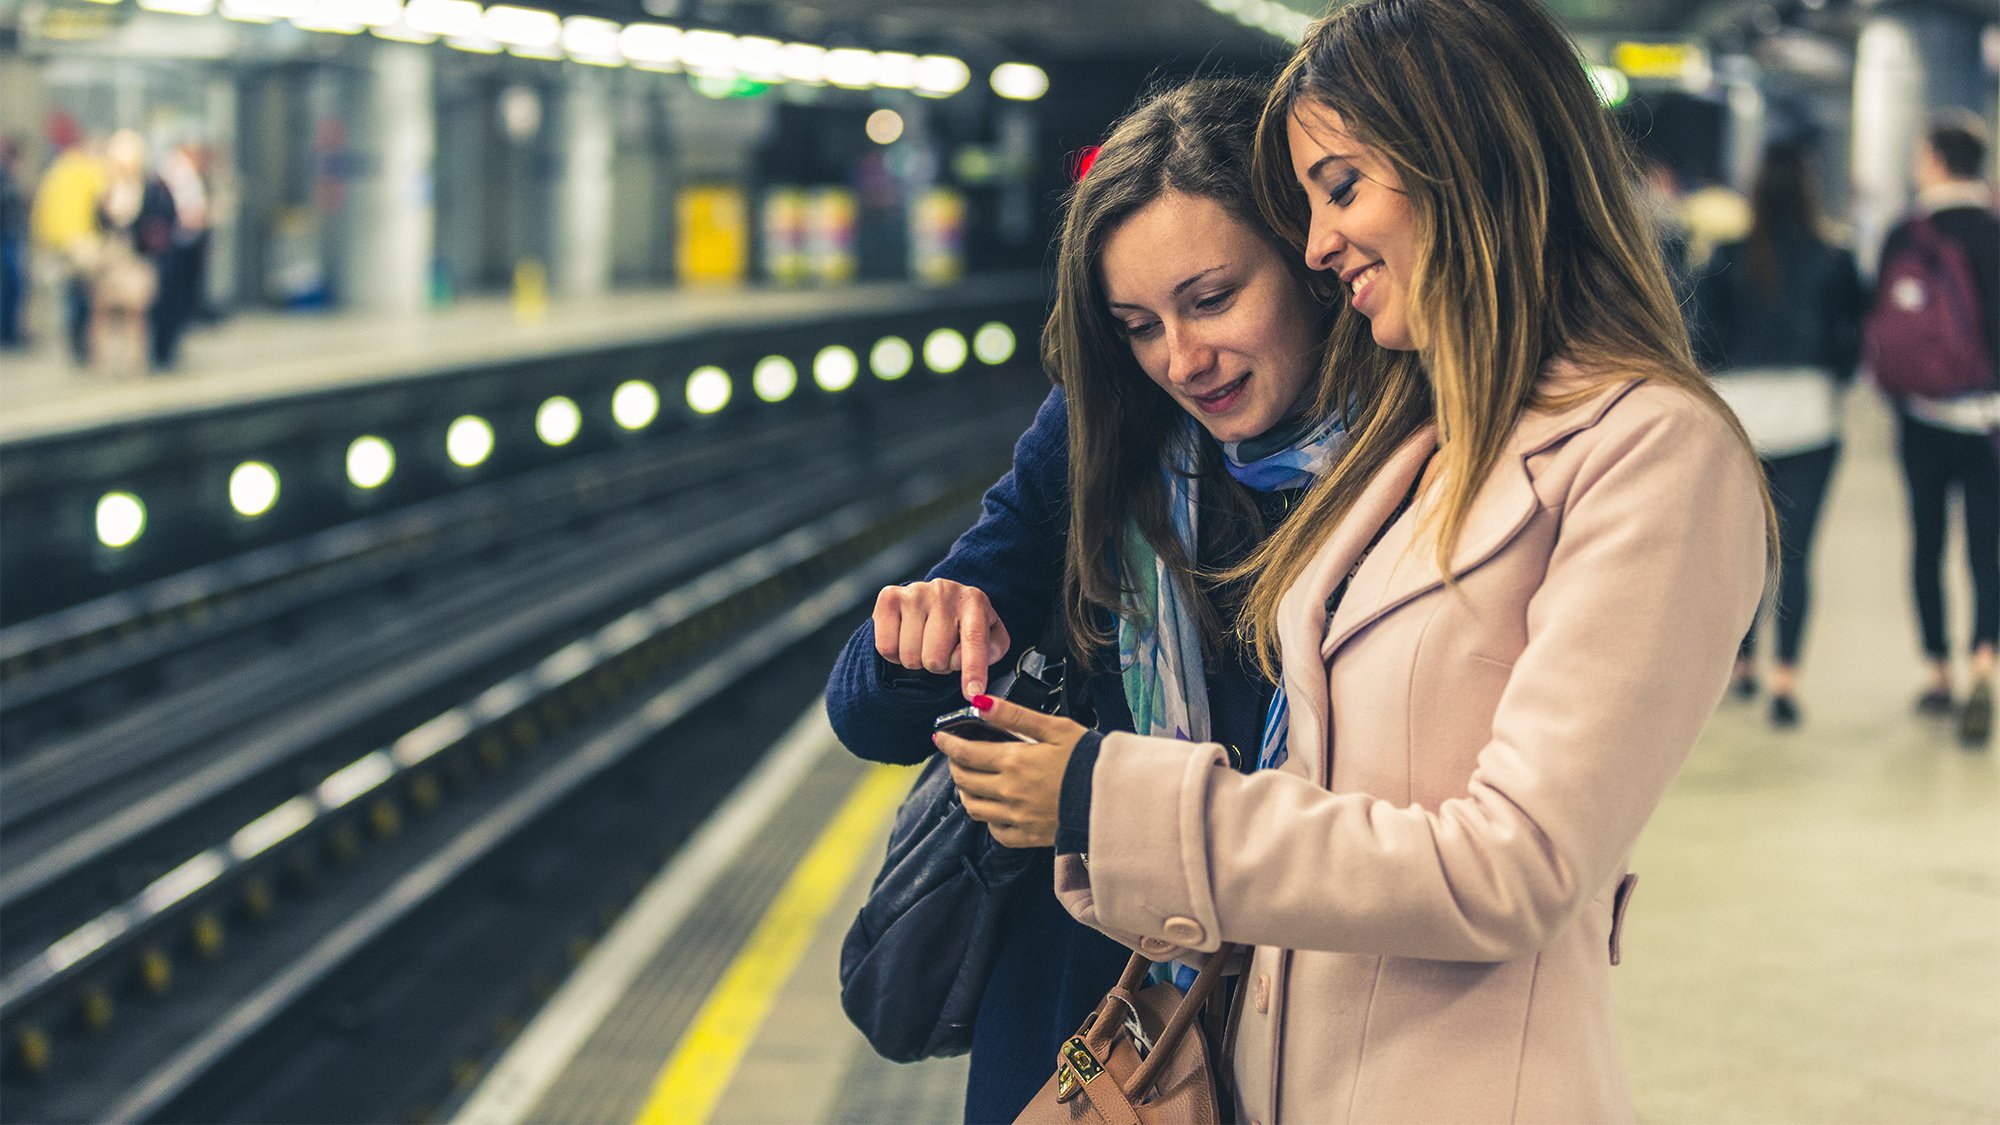 Two women use their phone while waiting on a train platform.